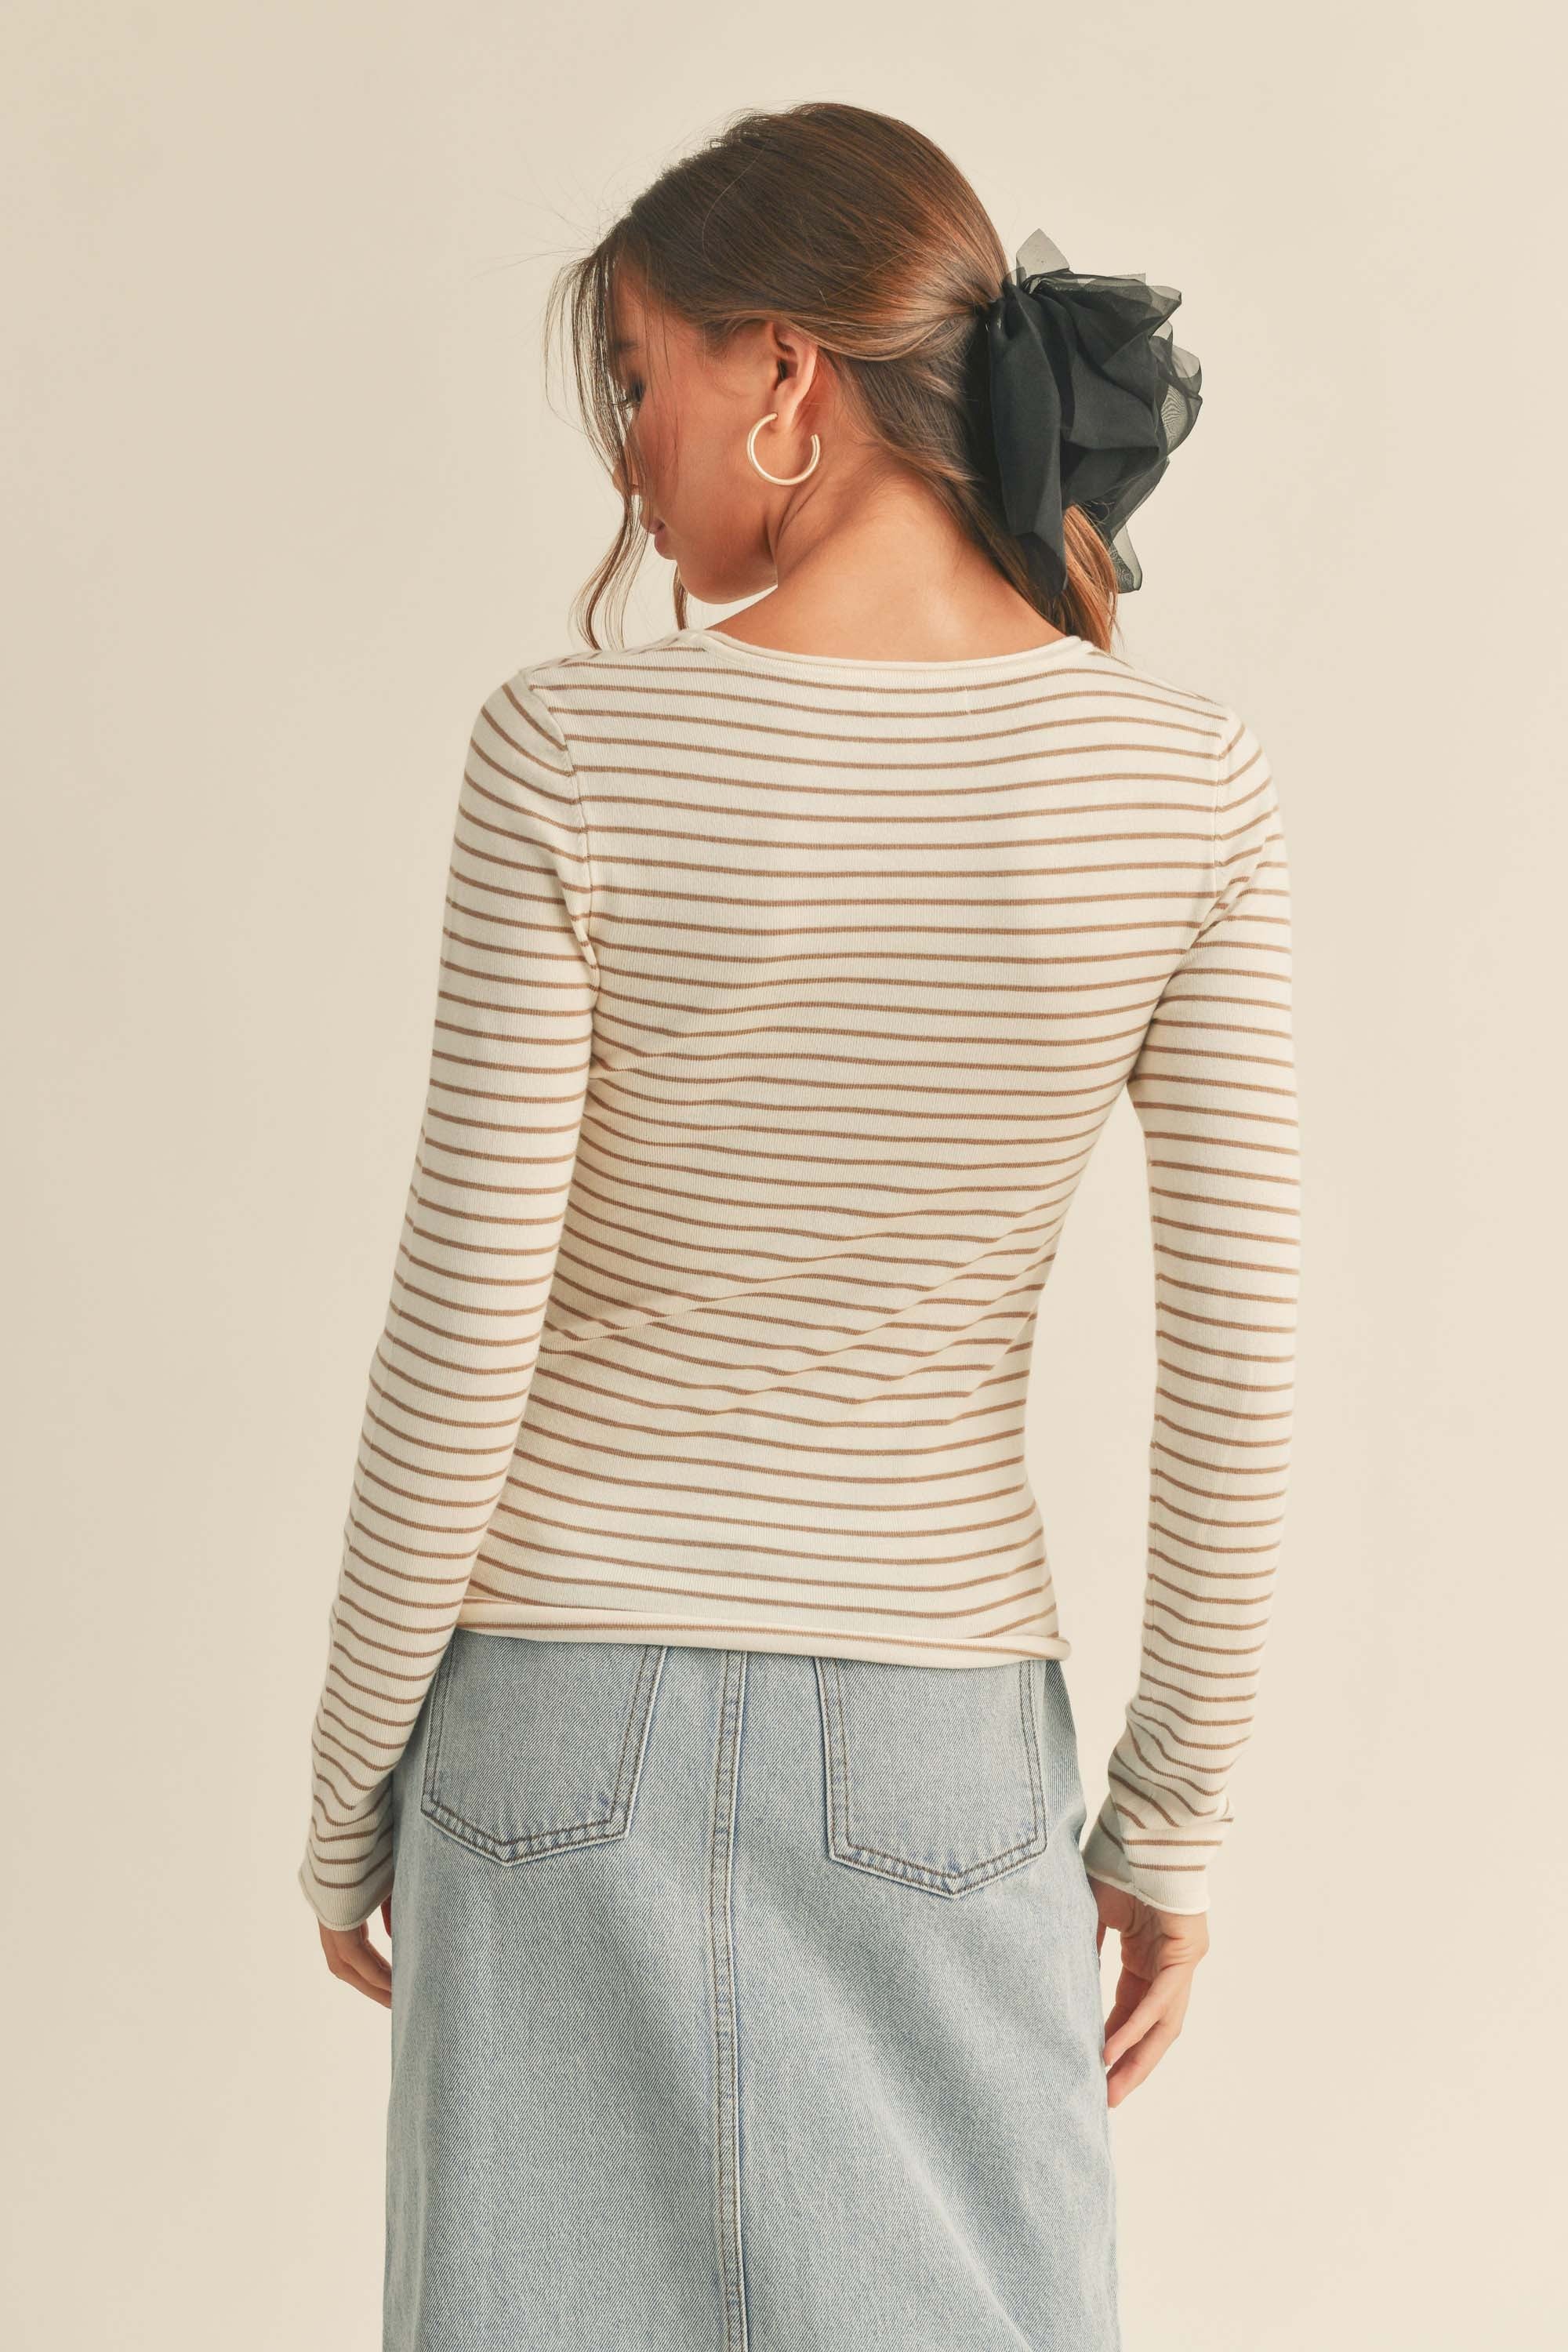 Striped Long Sleeve Knit Sweater in Black or Taupe